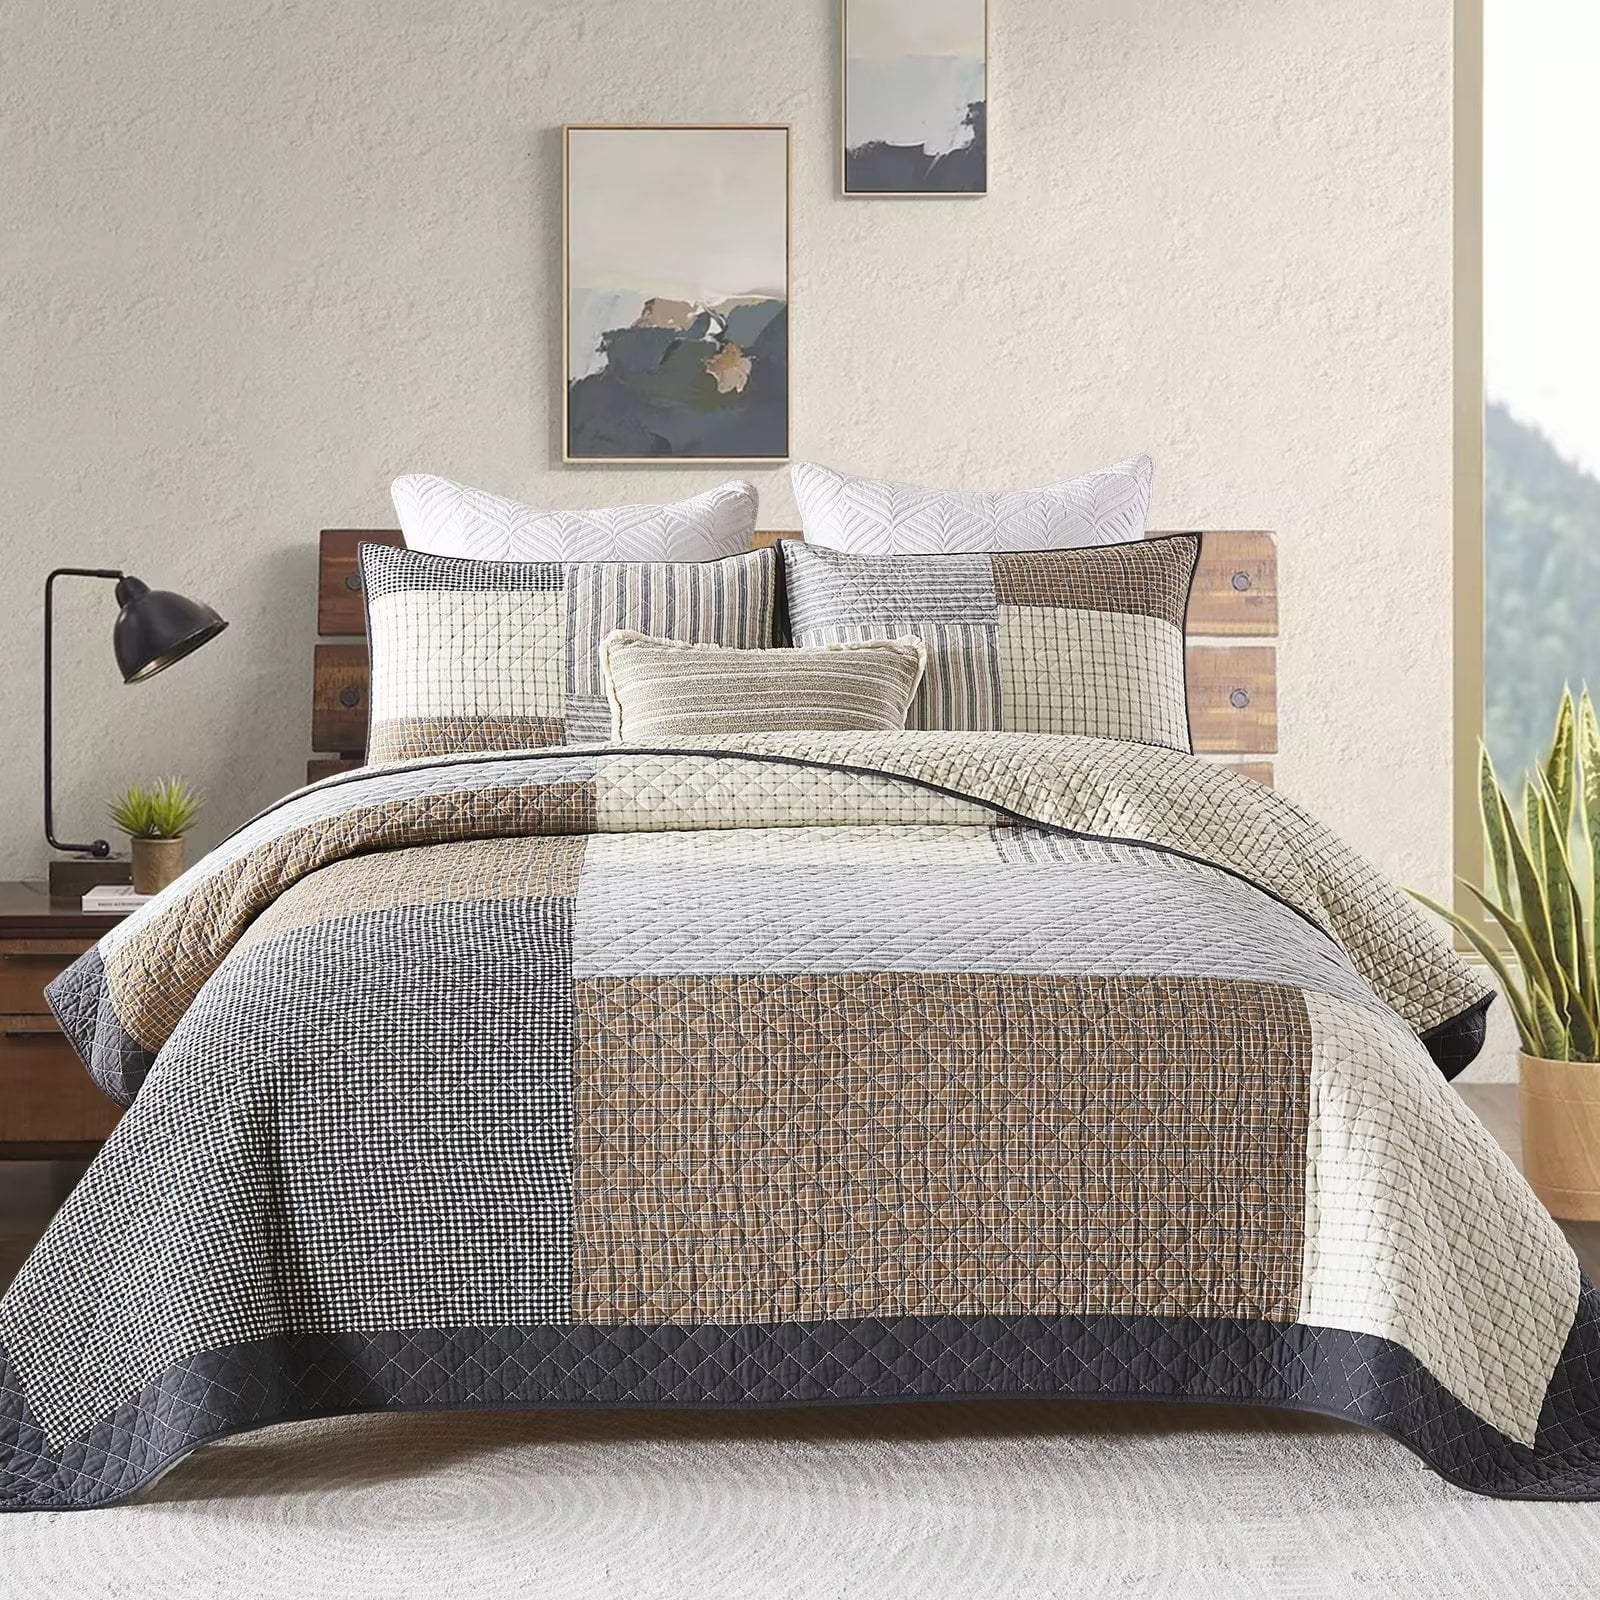 Bedduvit Quilt for King Bed - 100% Cotton Blue Gray Floral Real-Patchwork  Plaid Striped Farmhouse King Quilt Bedspread, Reversible Modern  Spring/Winter Lightweight Comforter Set, 3-Piece (98x106) 